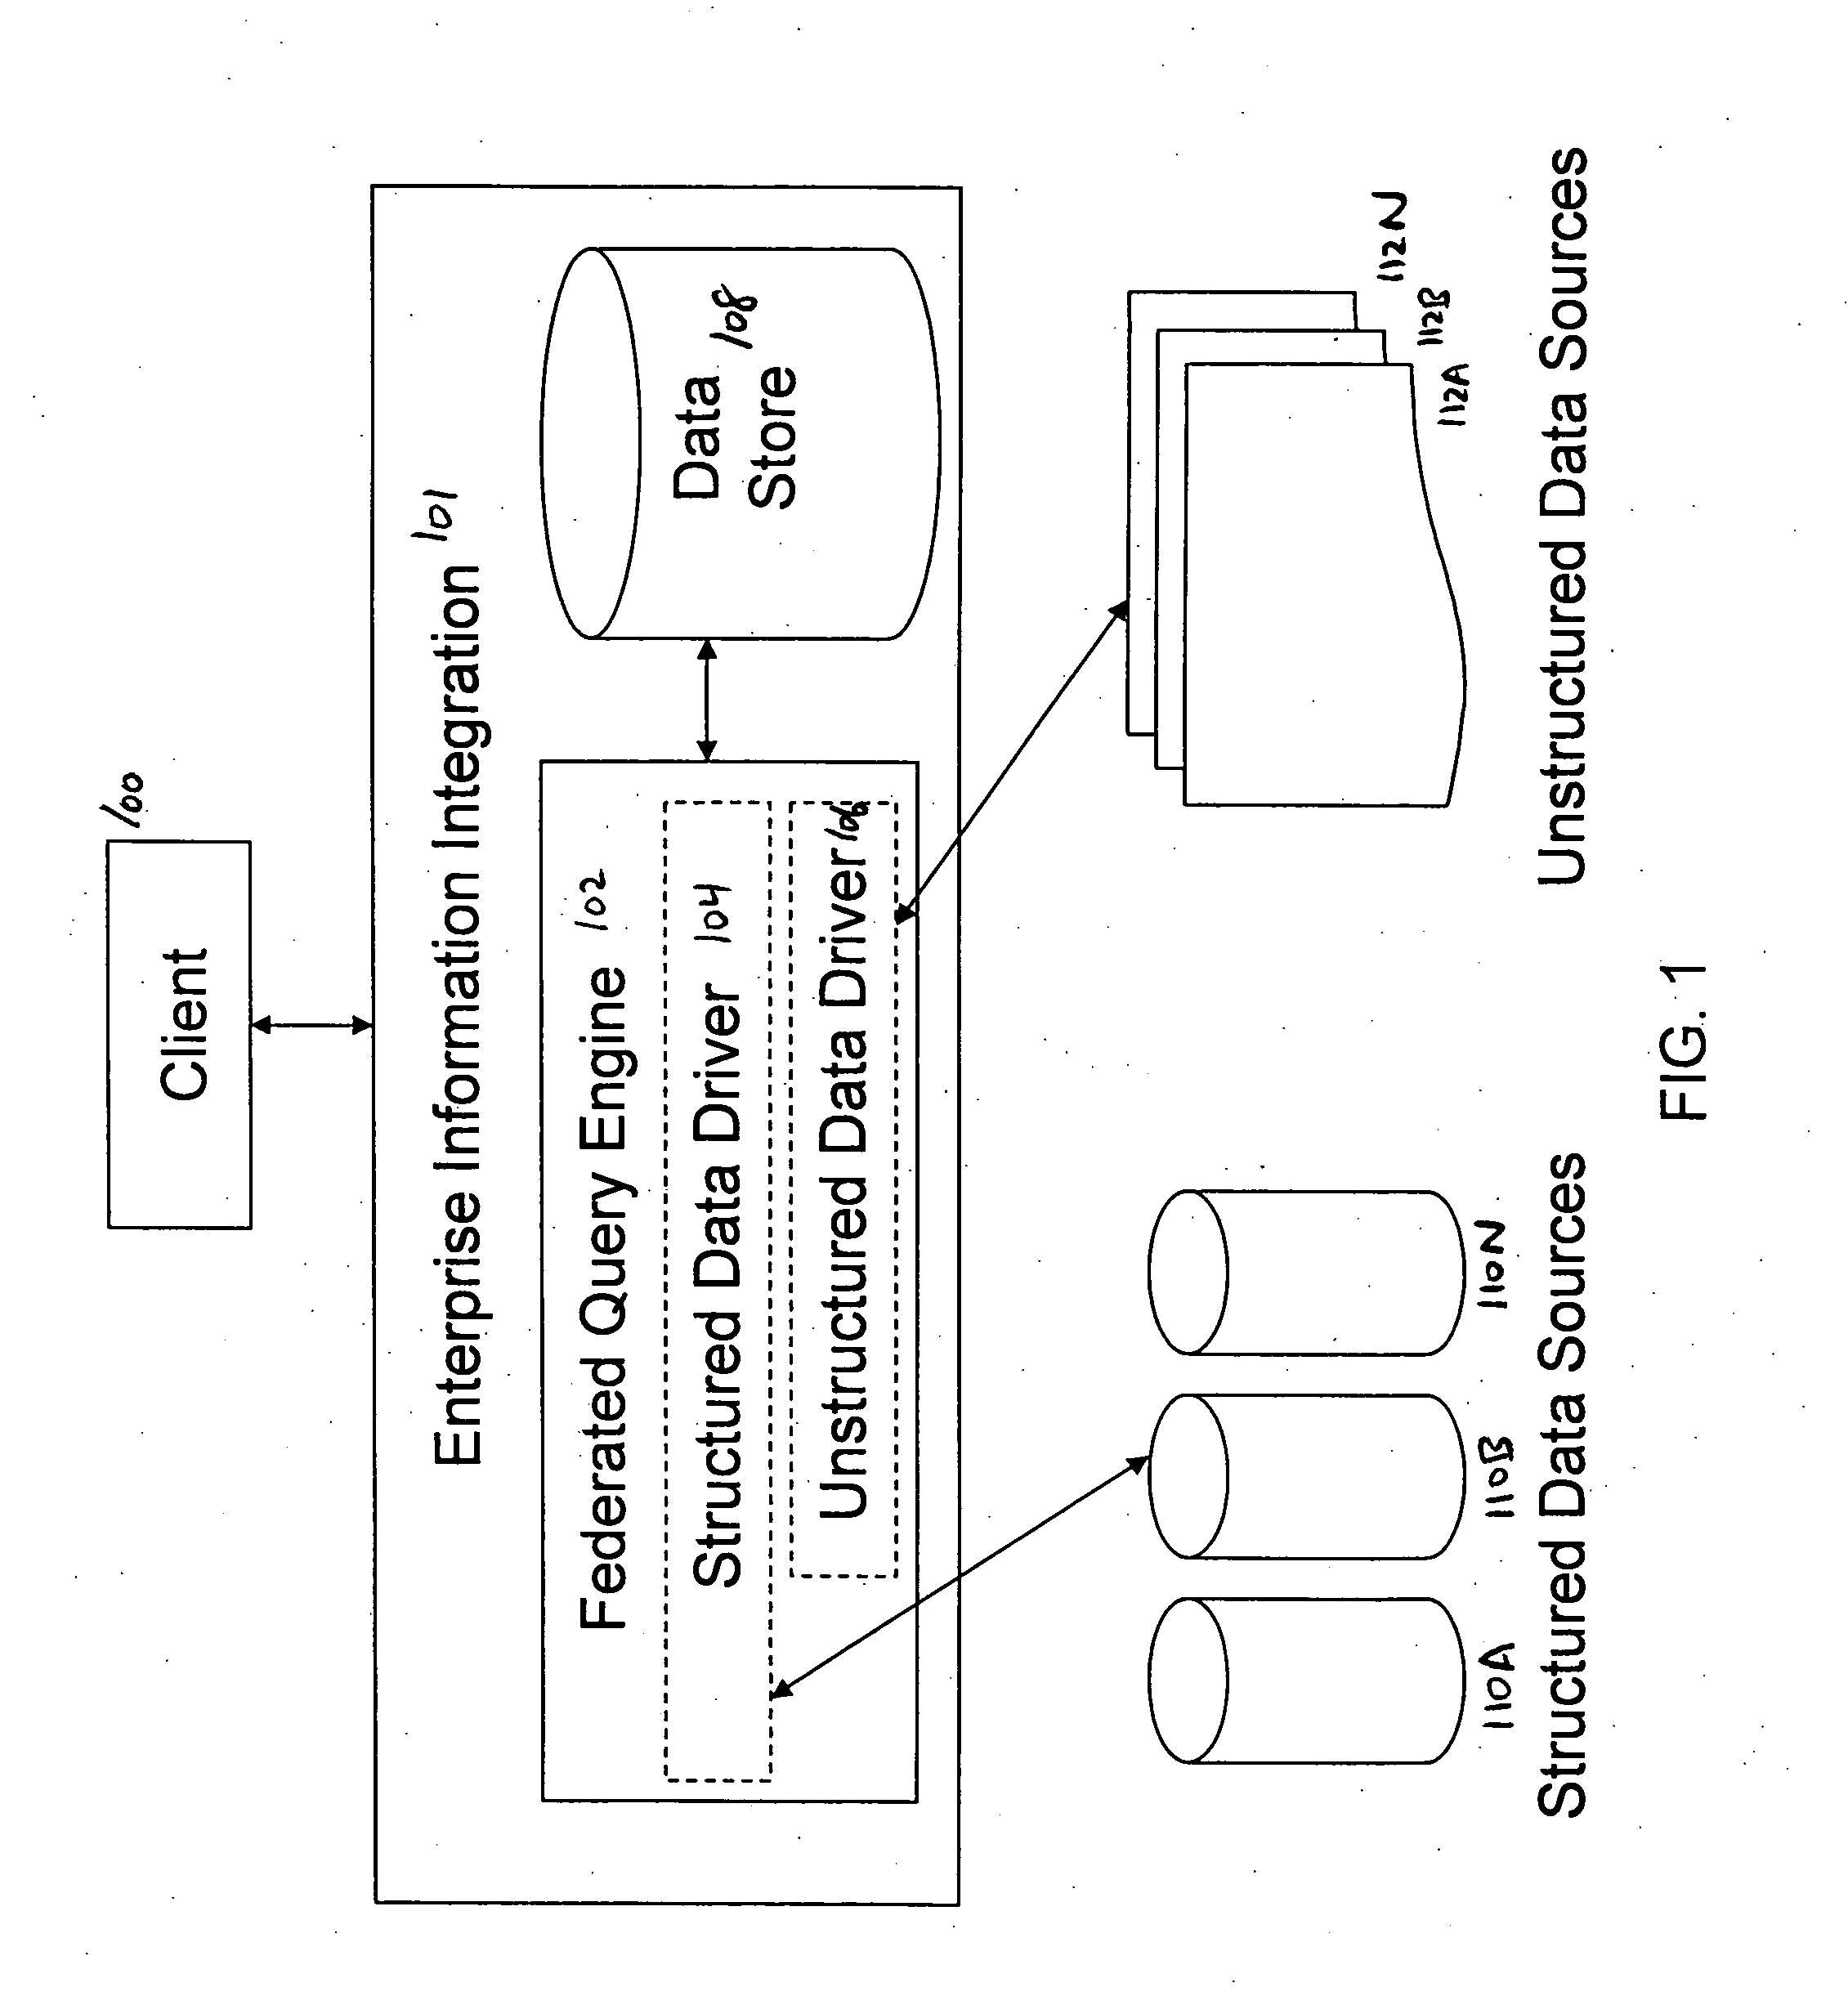 Apparatus and method for federated querying of unstructured data